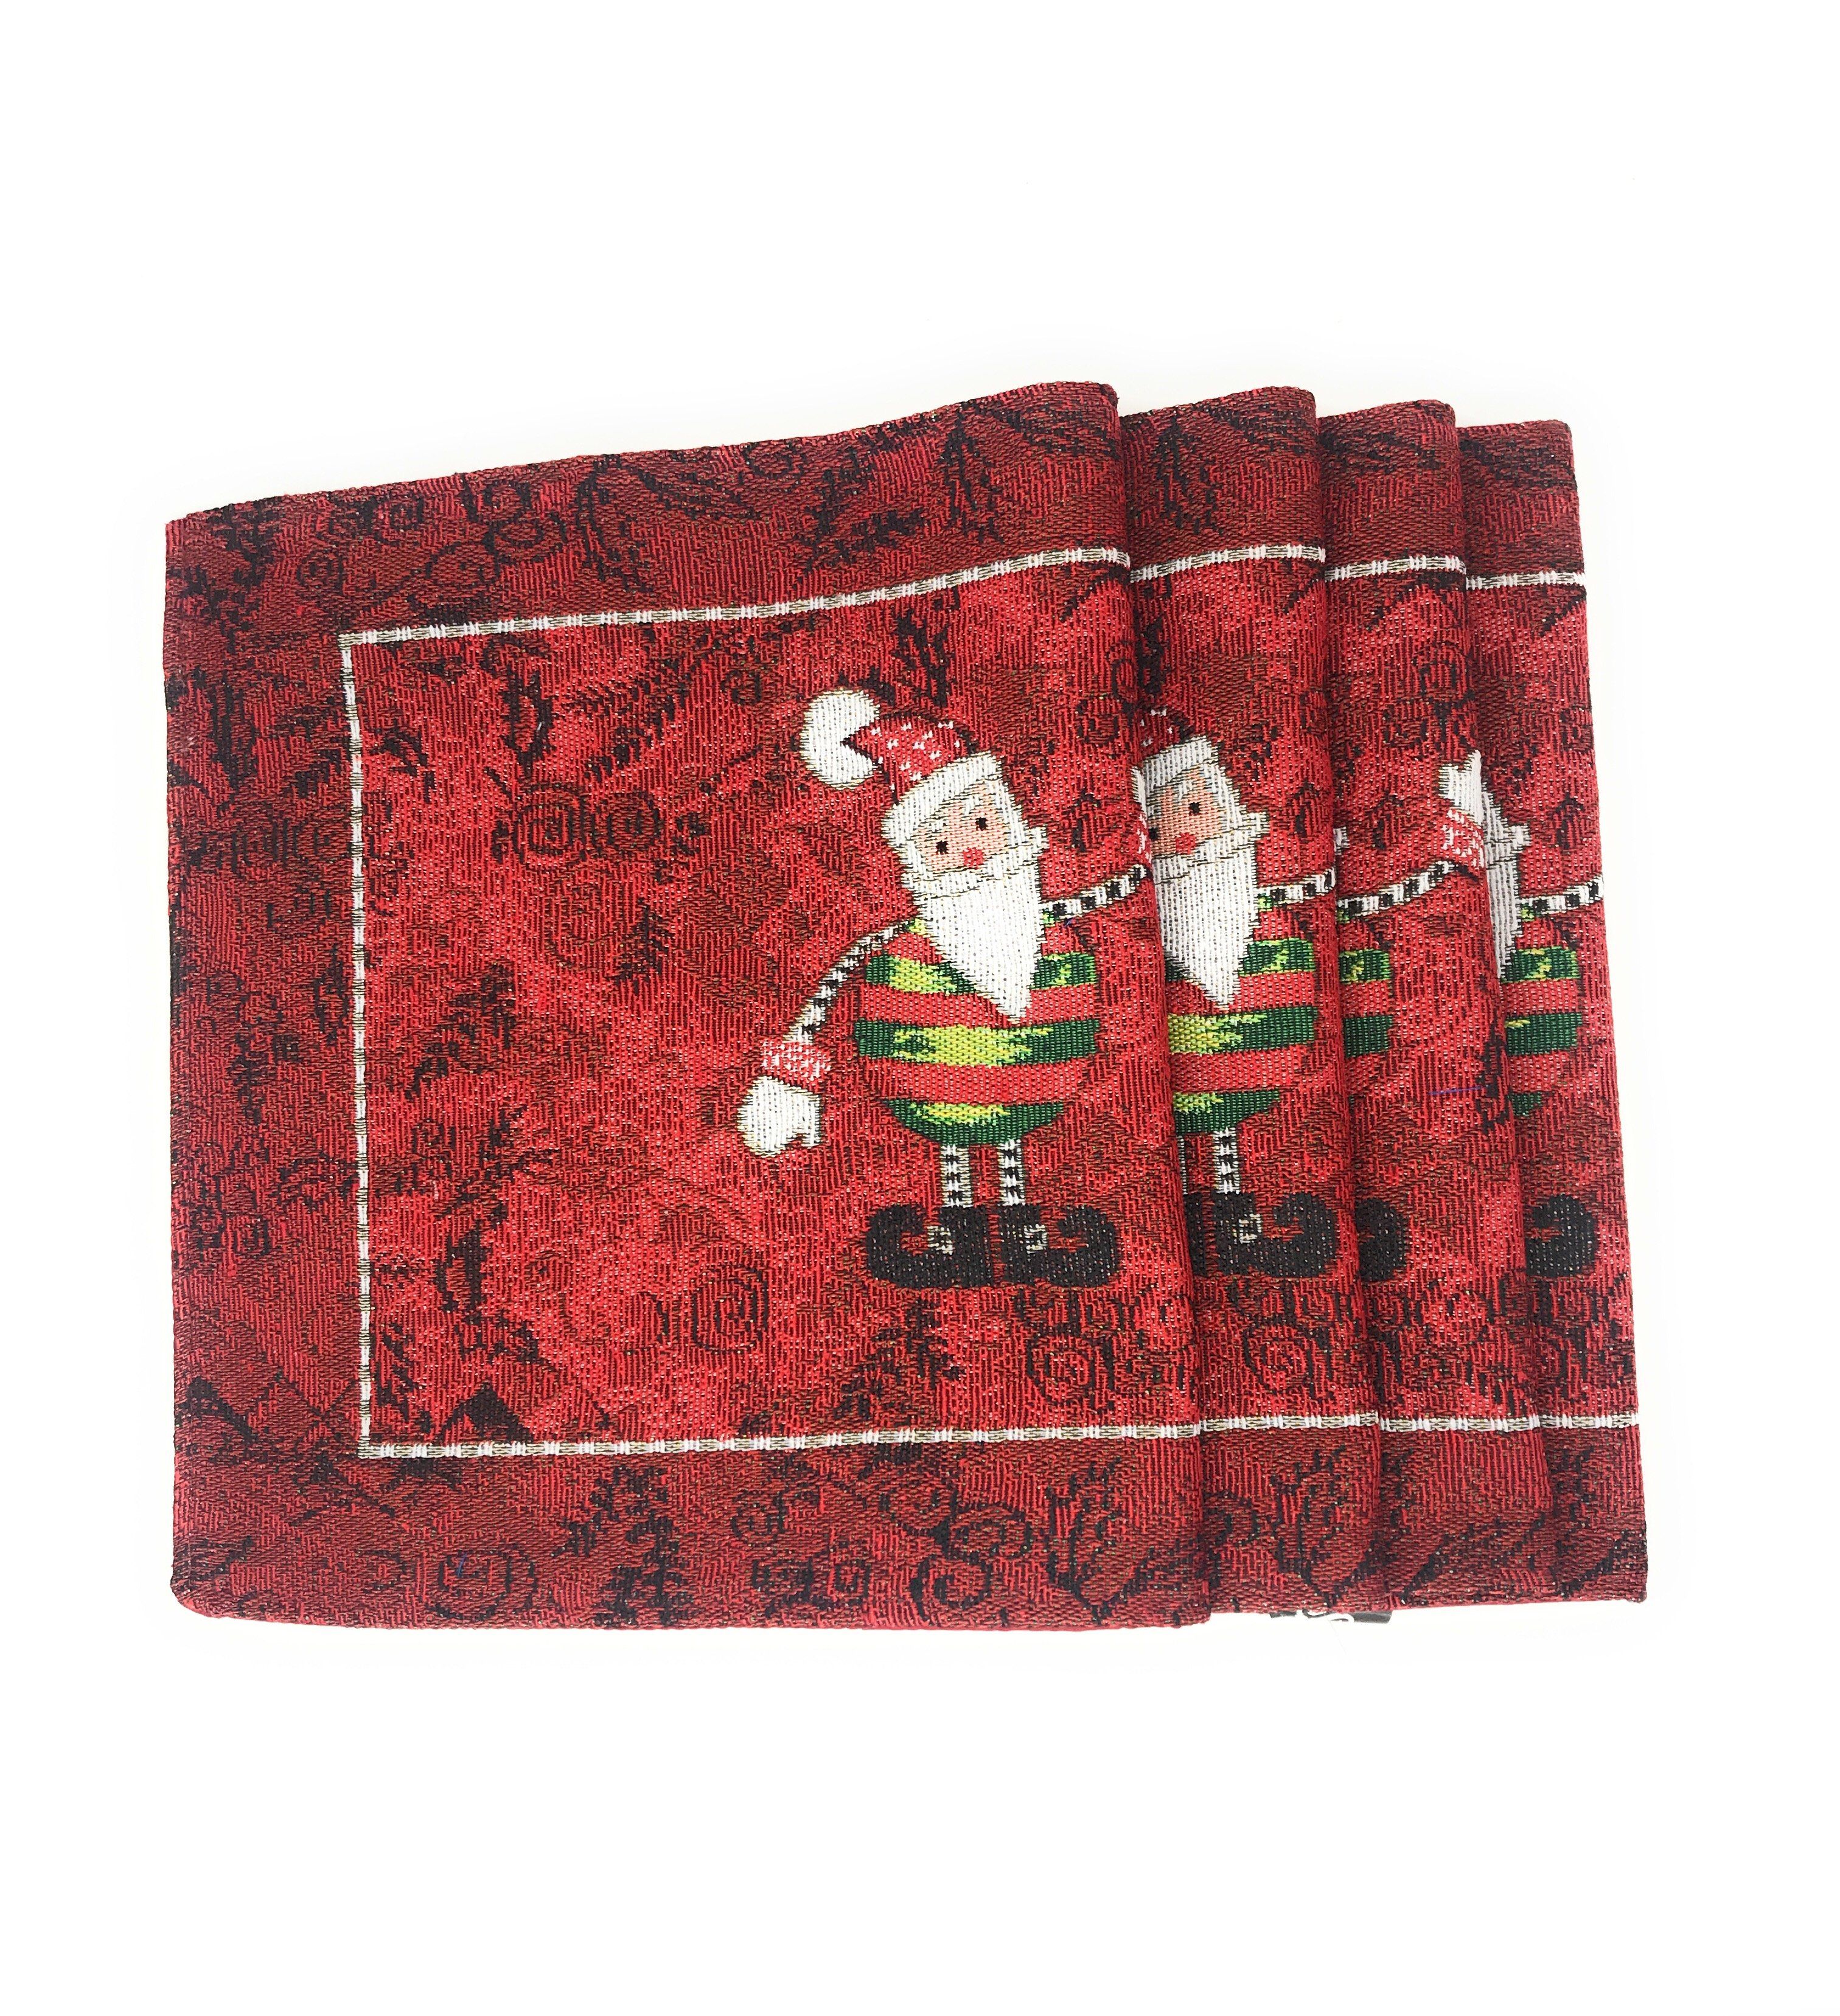 Tache Here Comes Santa Claus Vintage Holiday Woven Tapestry Red Christmas Placemat Set of 4 (8577PM) - Tache Home Fashion